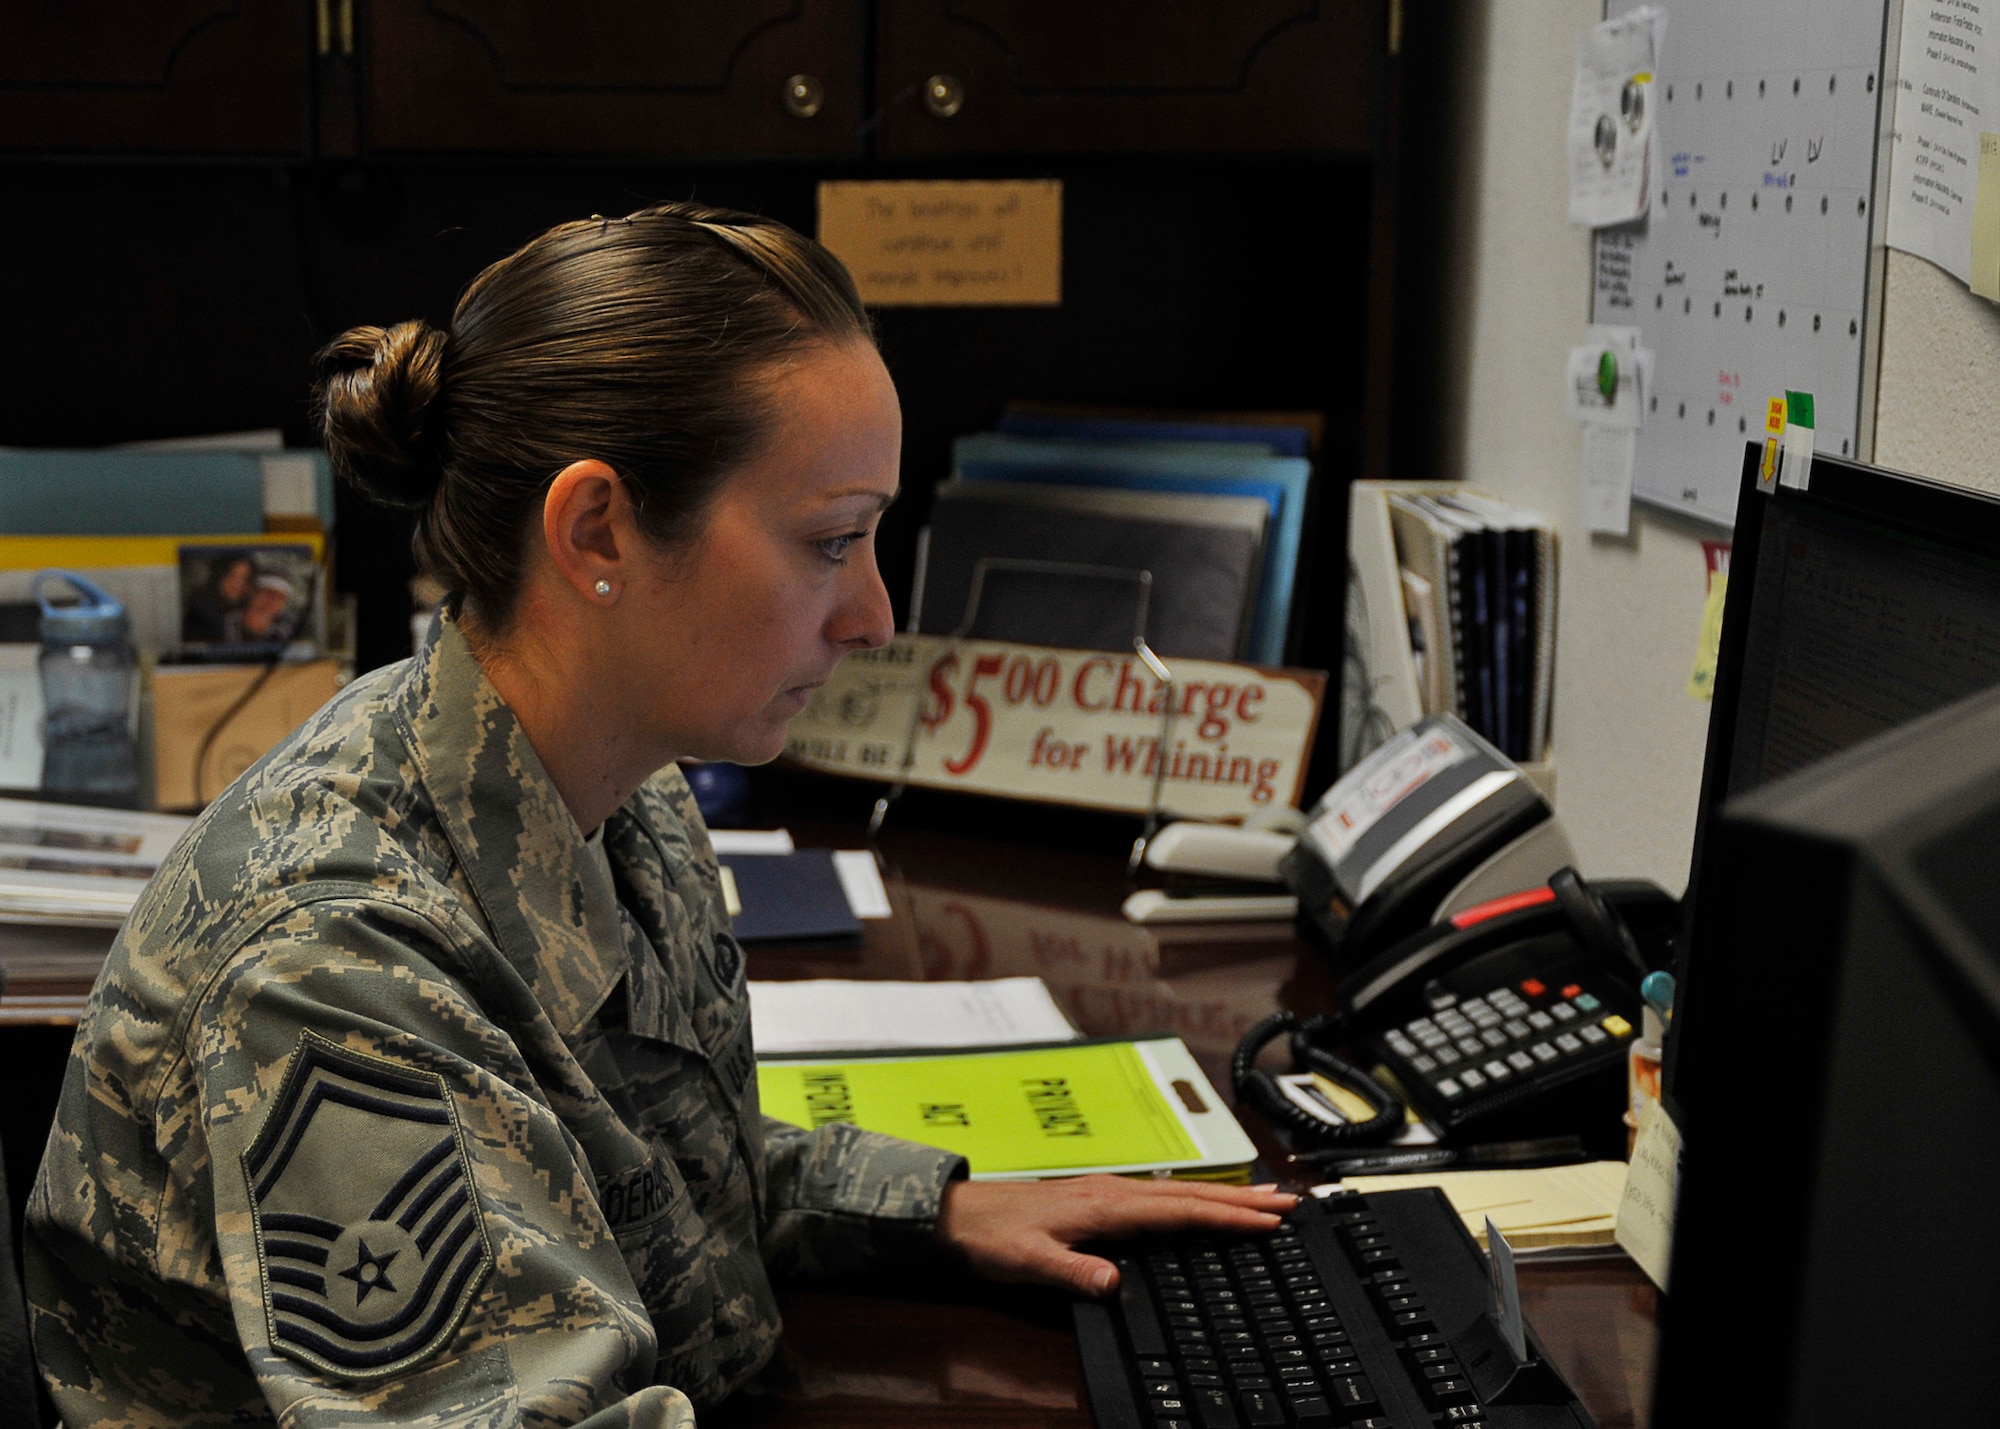 Senior Master Sgt. April Dereus, 325th Comptroller Squadron superintendent, checks emails April 18 to see where she is needed for the day. A superintendent is responsible for coordinating mission cohesion on many levels. (U.S. Air Force photo by Airman 1st Class Solomon Cook)